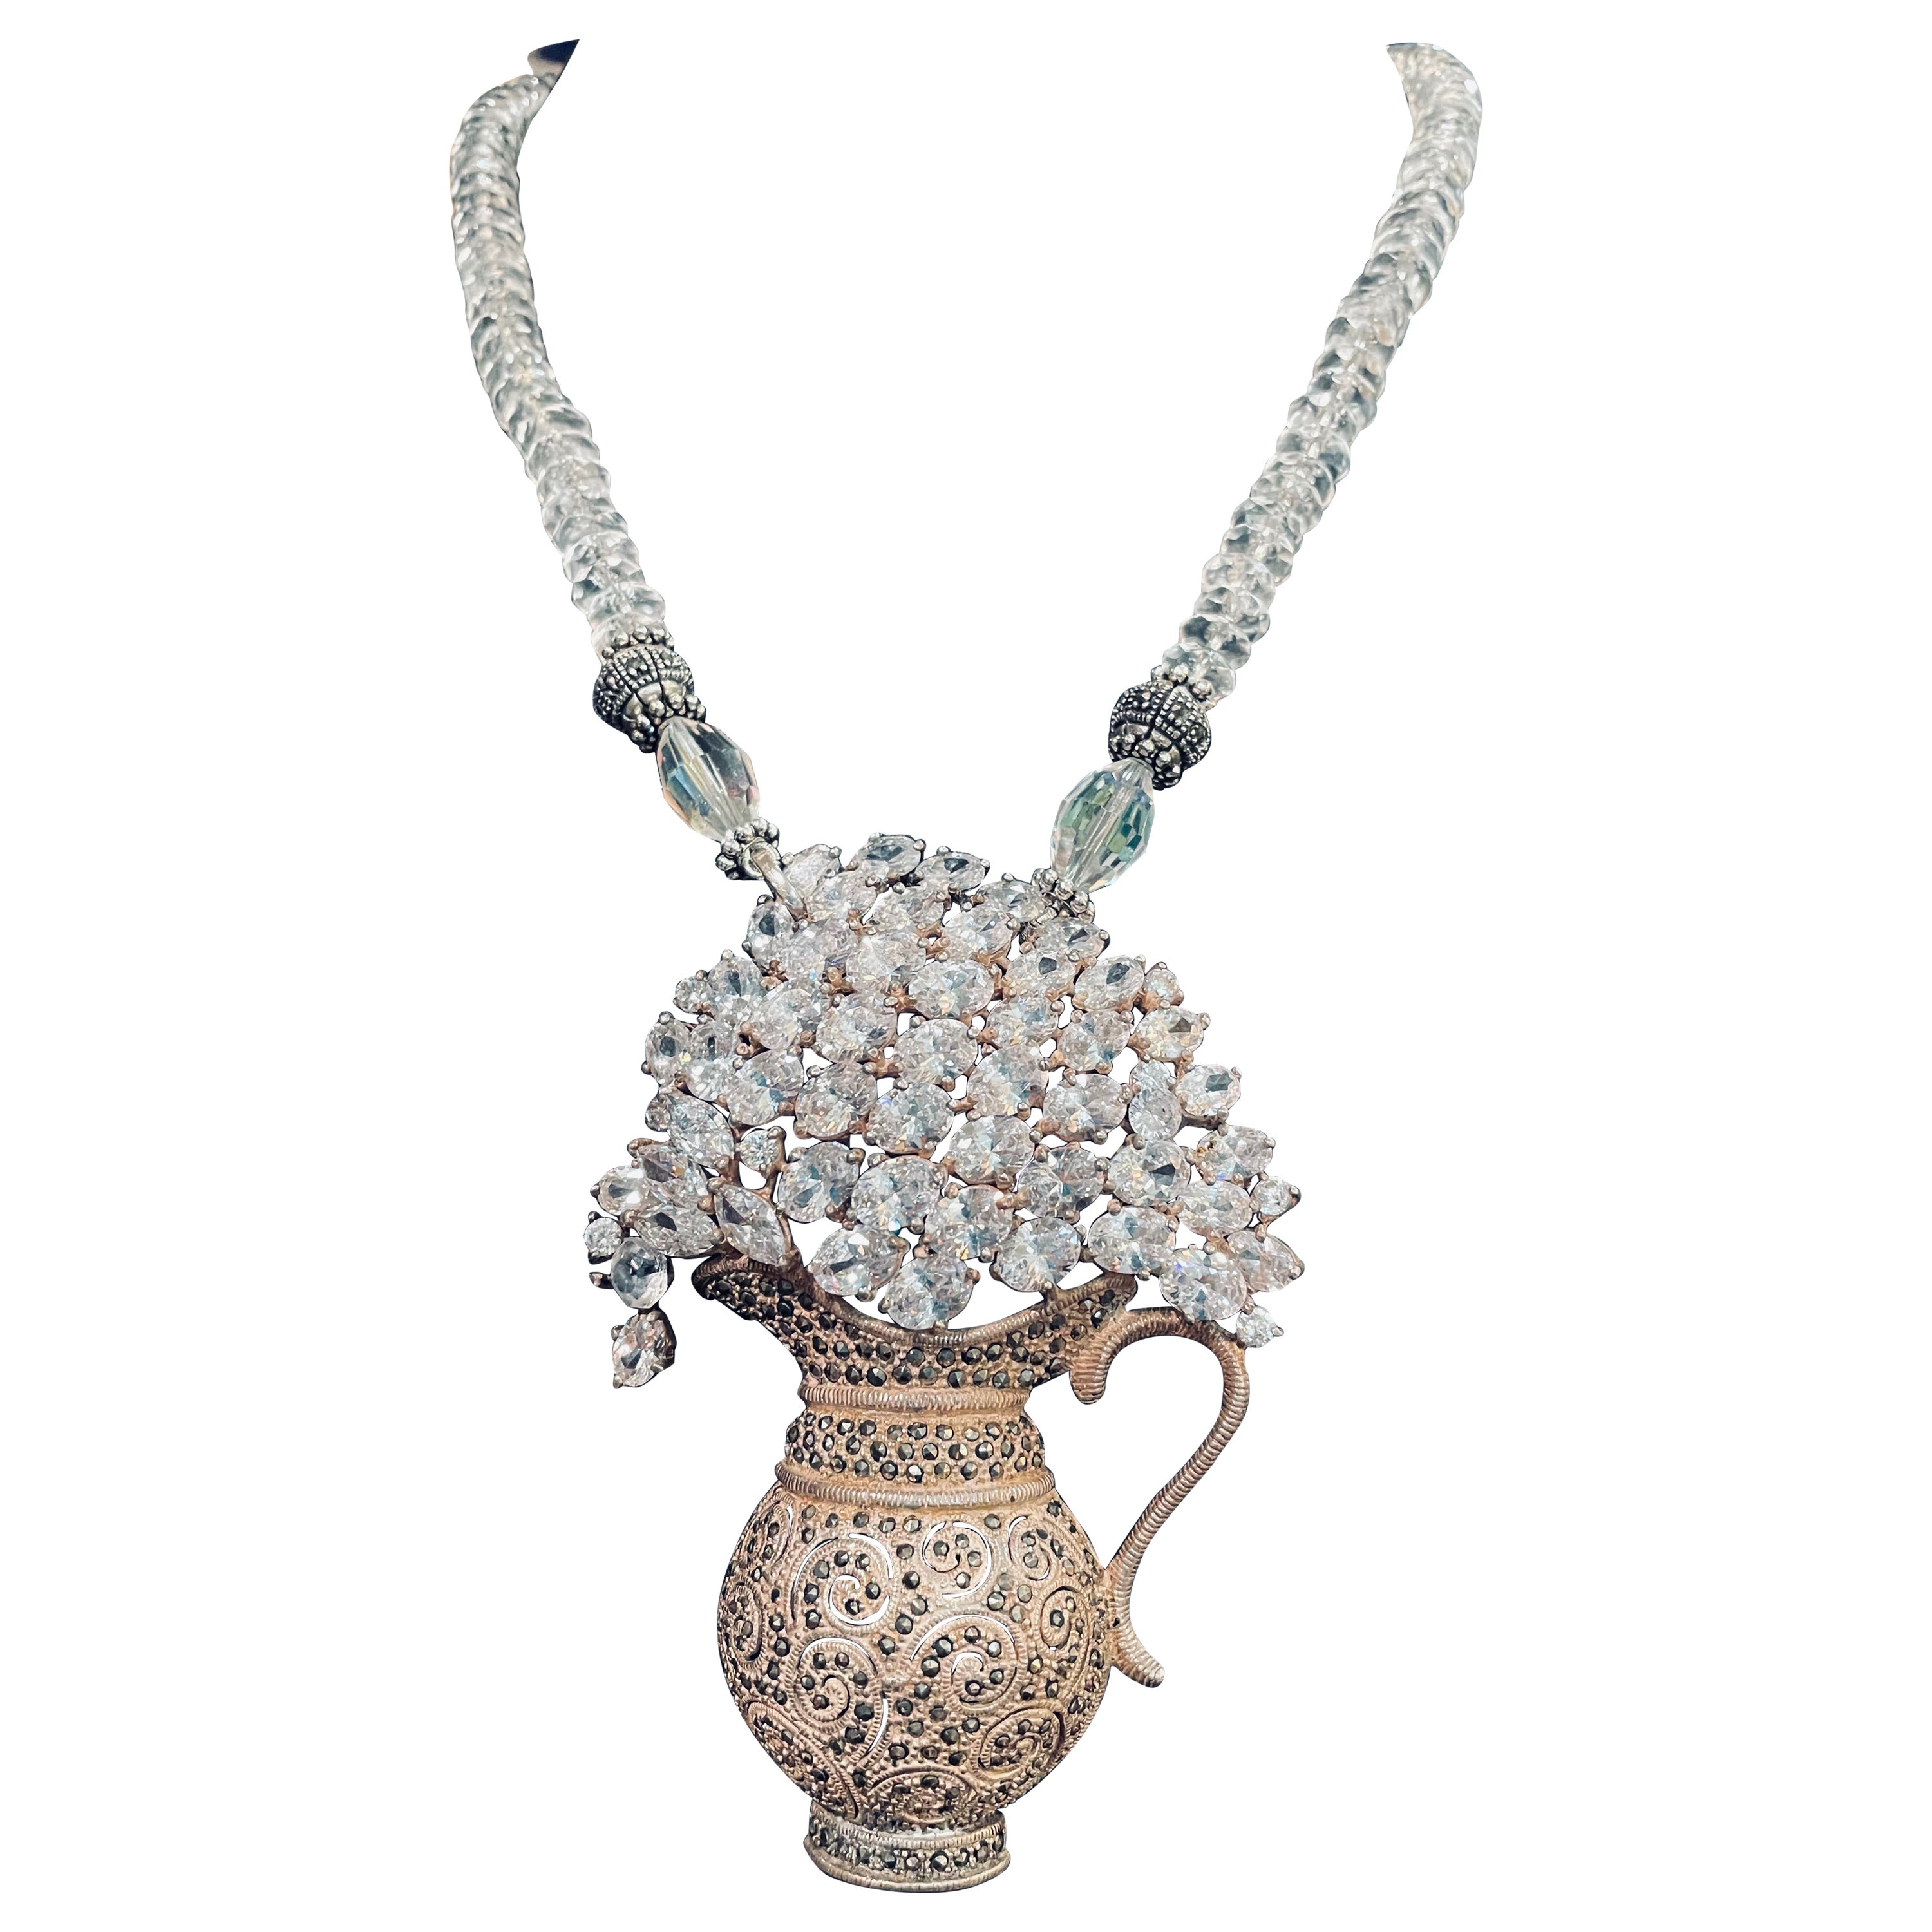 LB offers a Stunning, OOAK , Sterling and Crystal, Vintage Urn  Pendant necklace For Sale